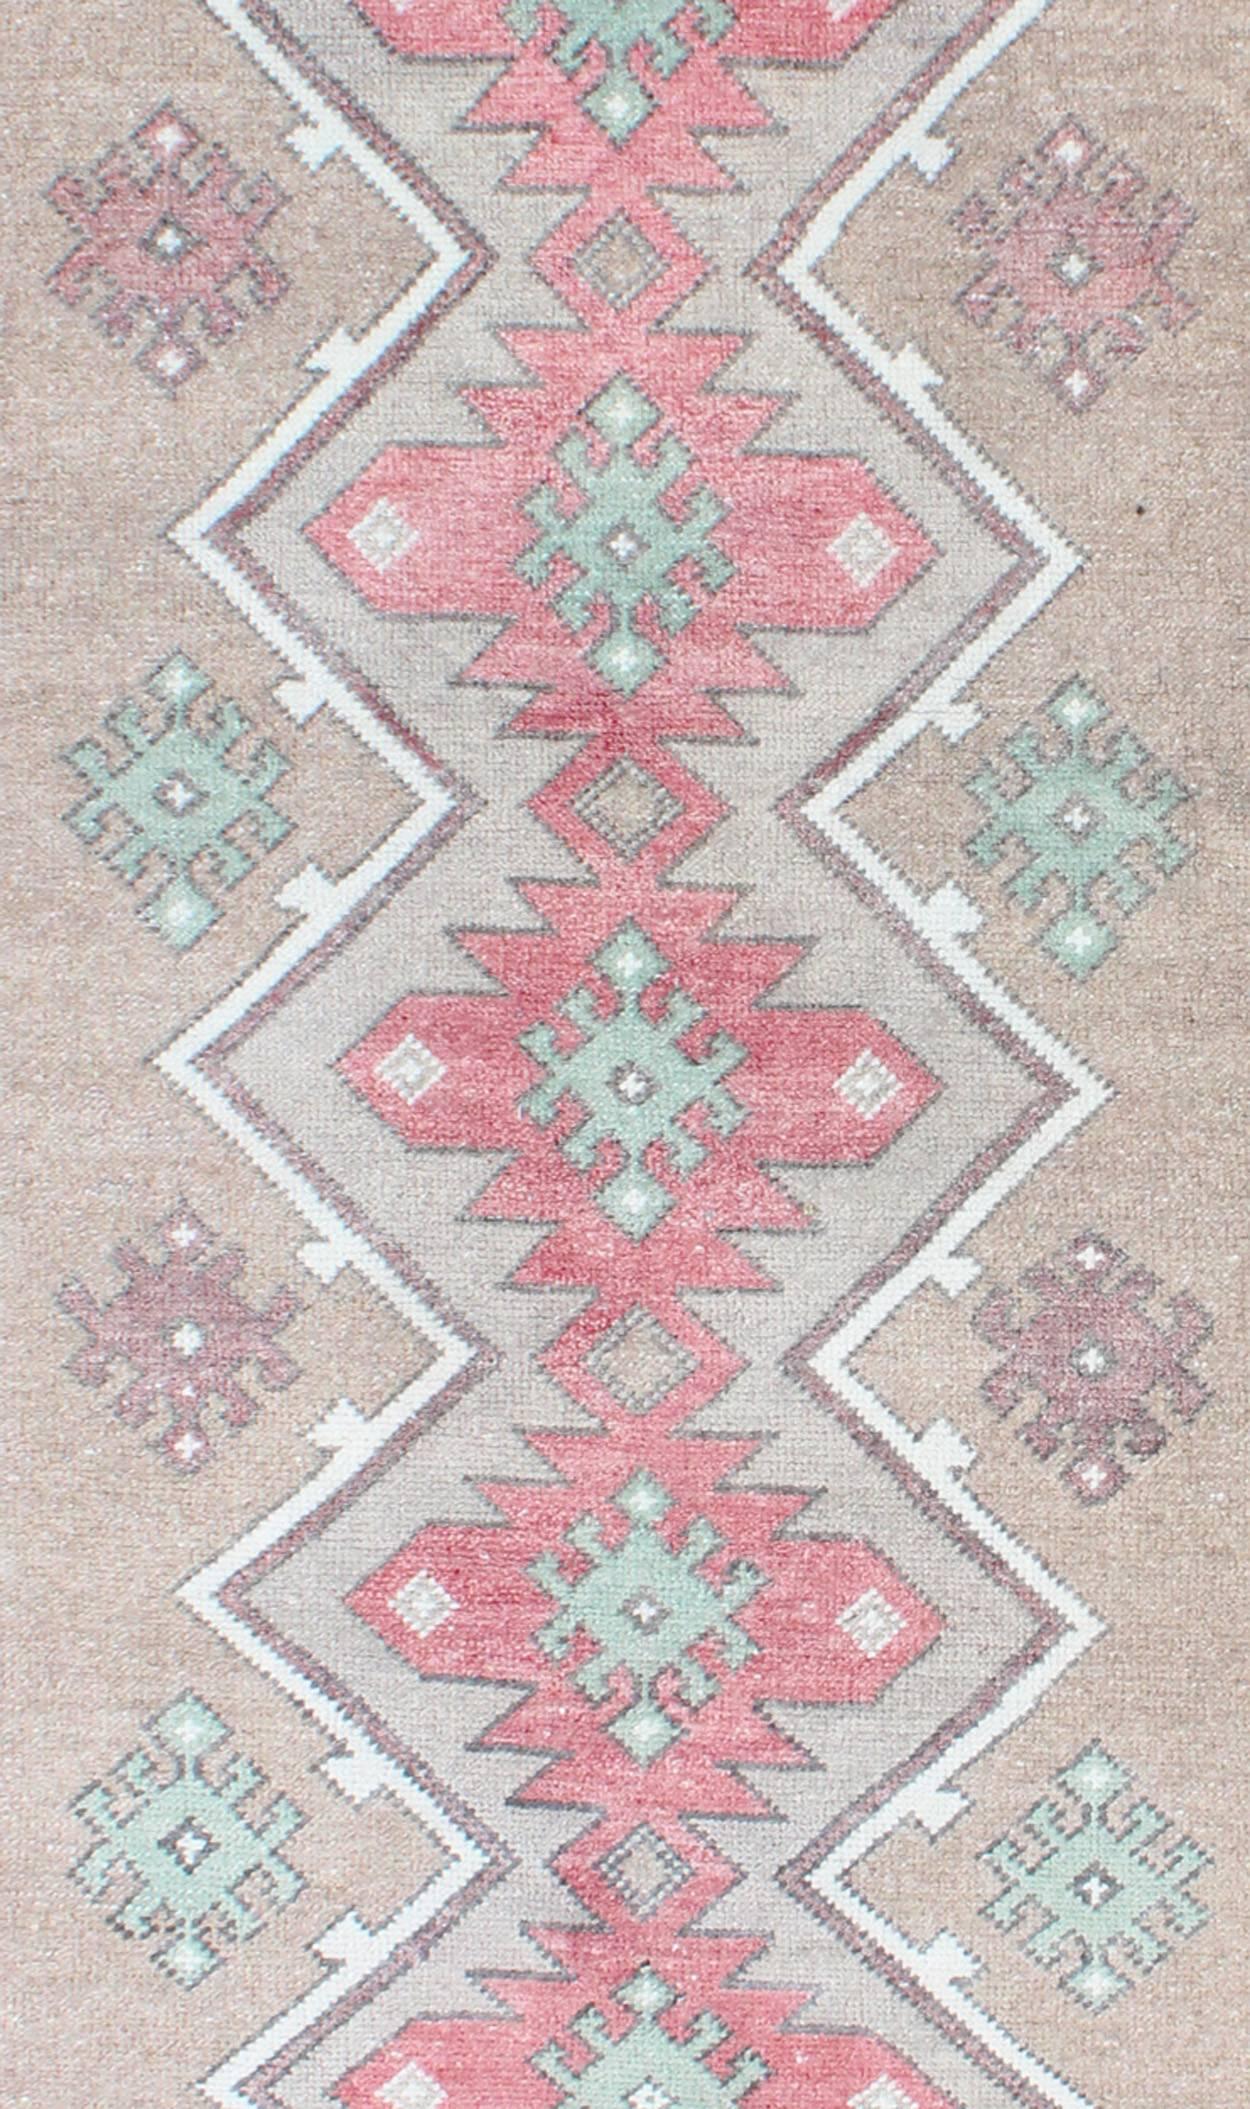 Hand-Knotted Turkish Tulu Runner With Geometric Medallions in Vivid Coral, Tan, Mint Green For Sale